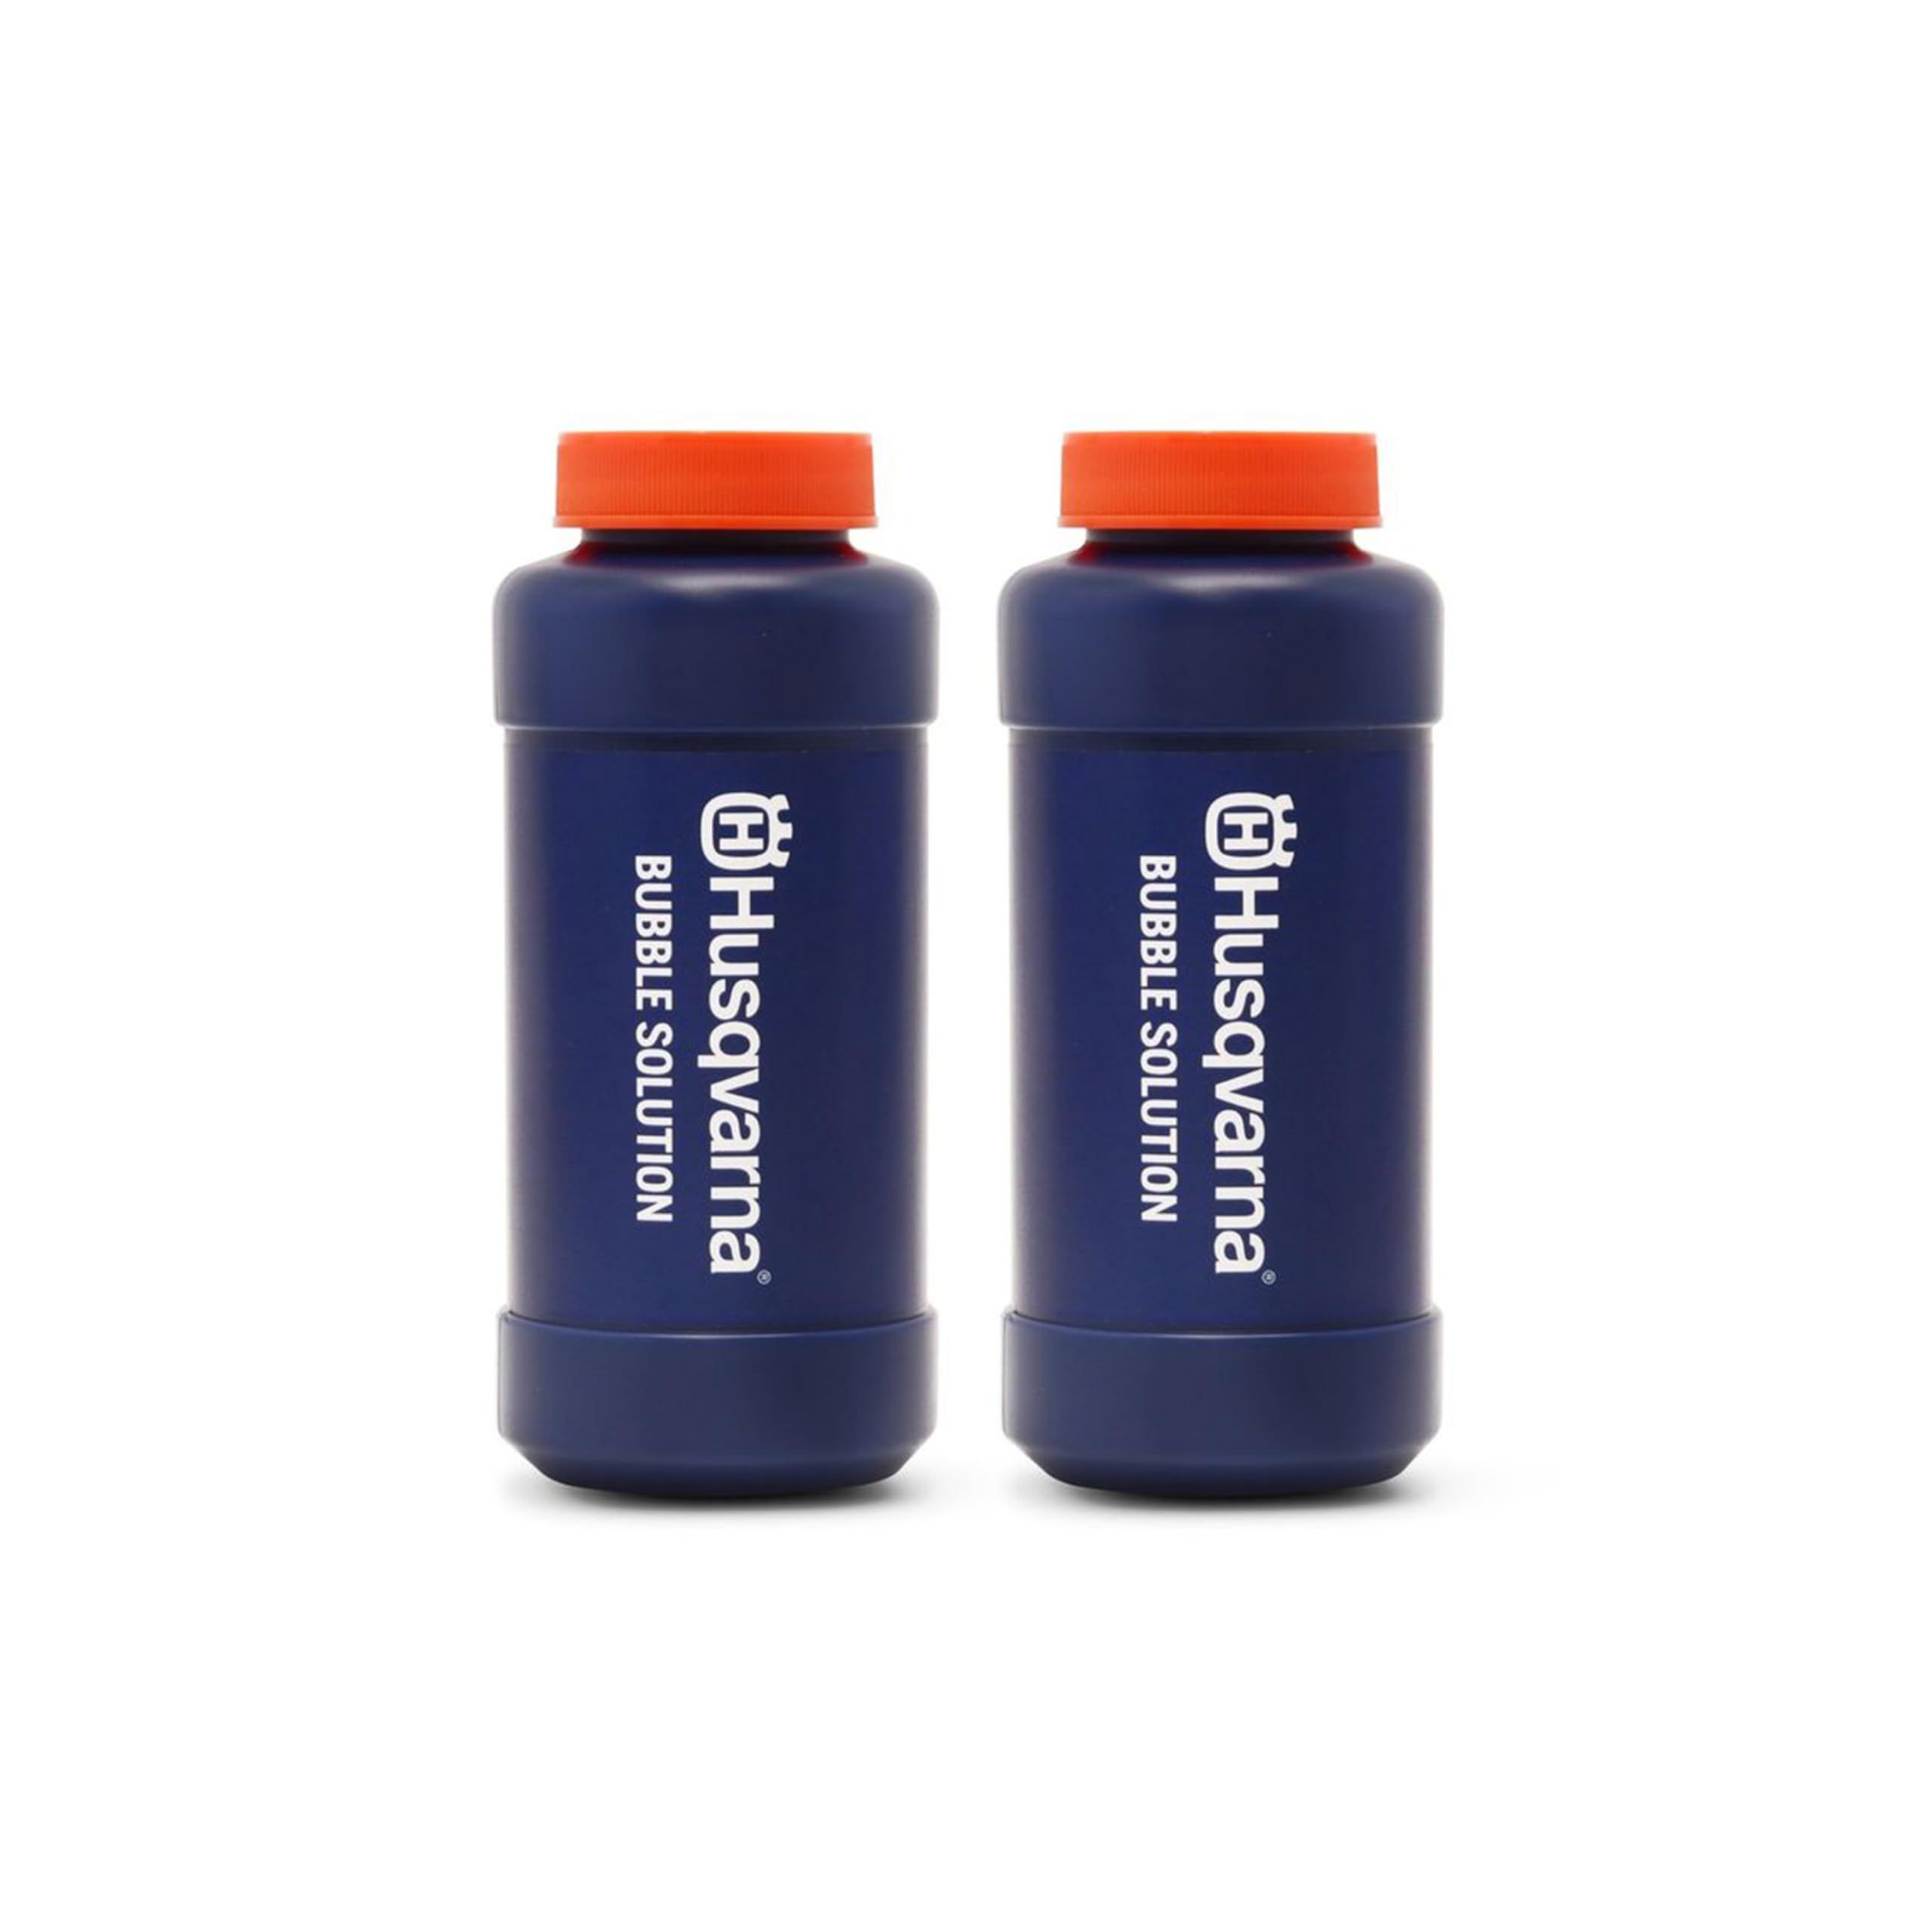 Husqvarna Toy Bubble Solution 2-Pack